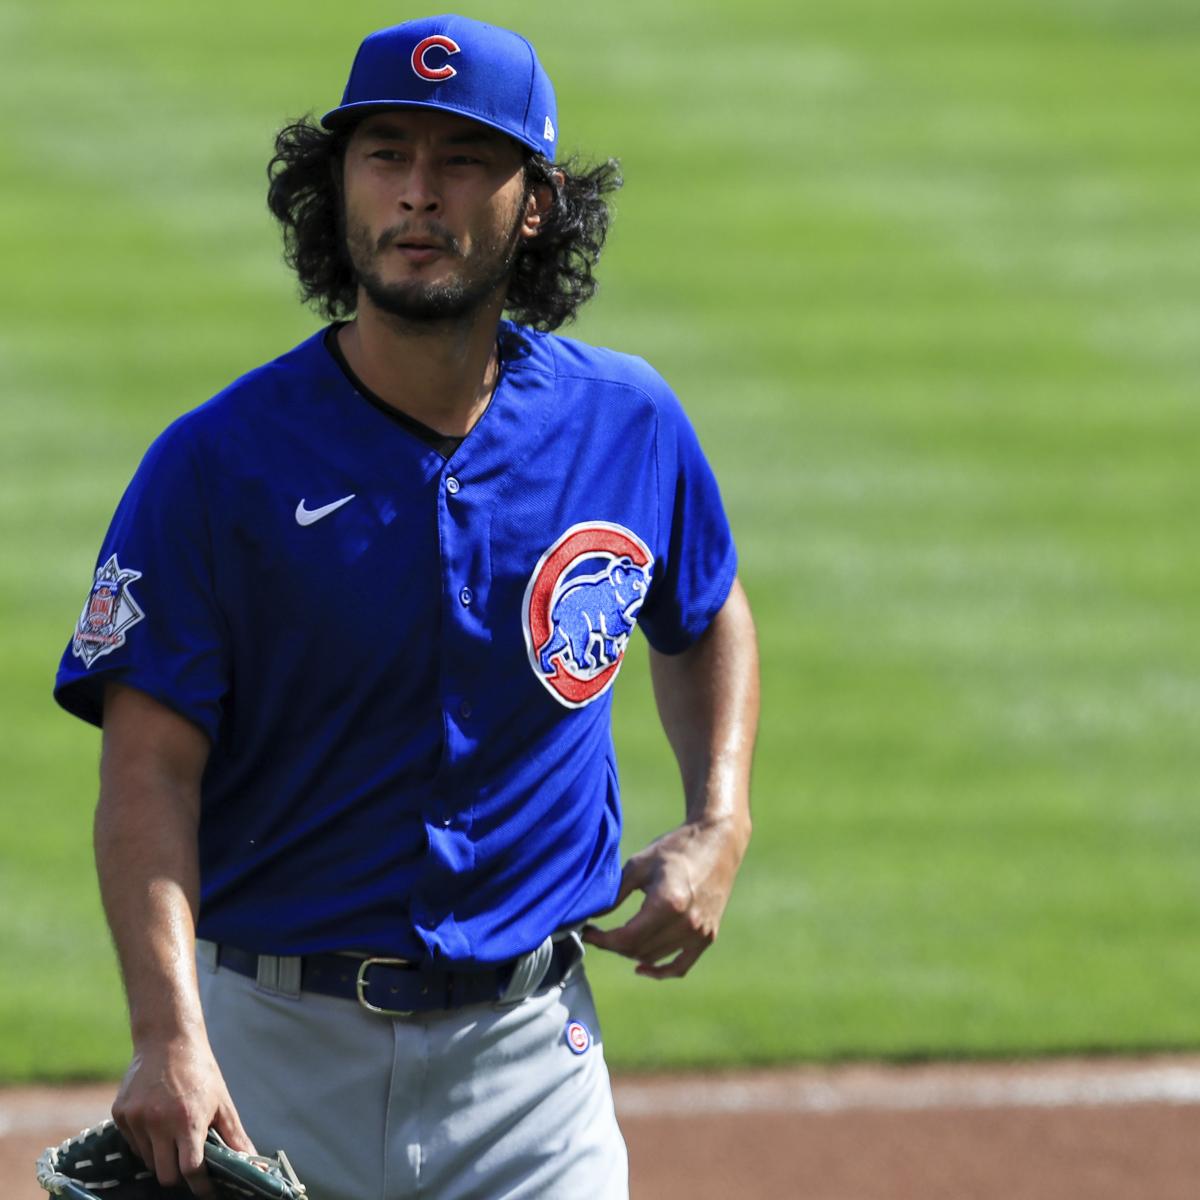 Represent: Yu Darvish Swap to Padres Finalizing; Cubs Earn Zach Davies, Potentialities